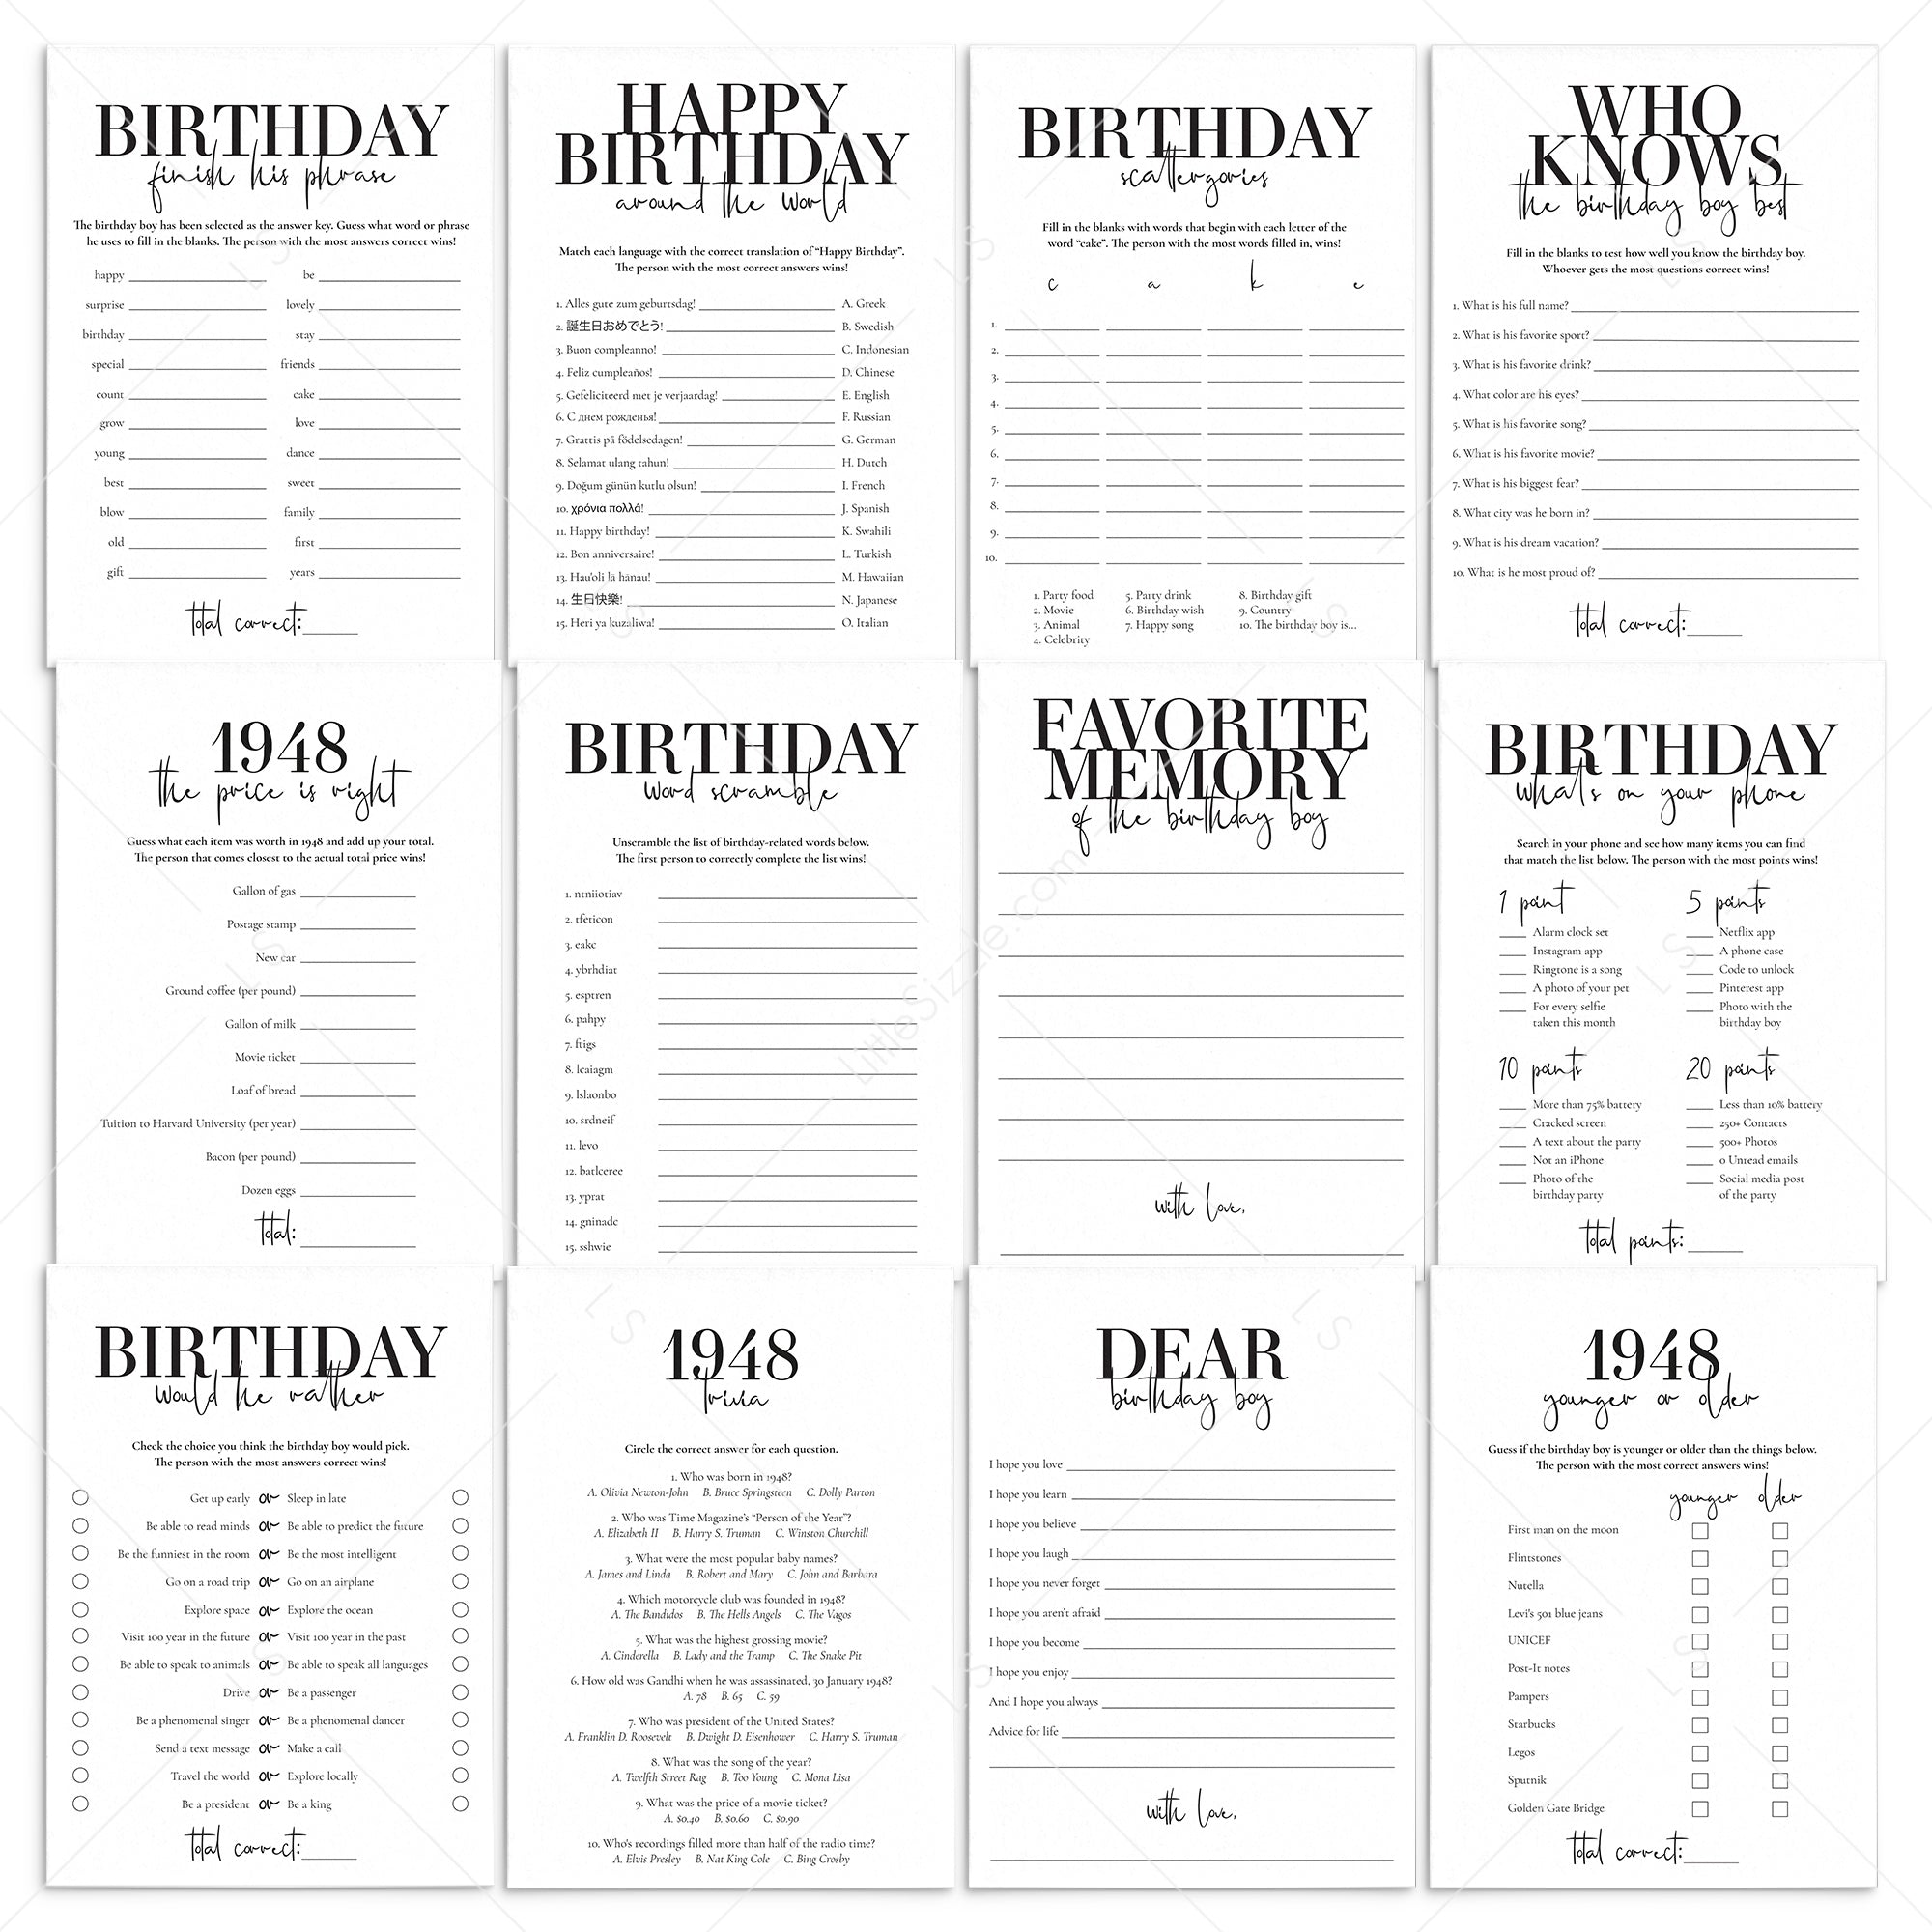 Born in 1948 75th Birthday Party Games Bundle For Men by LittleSizzle